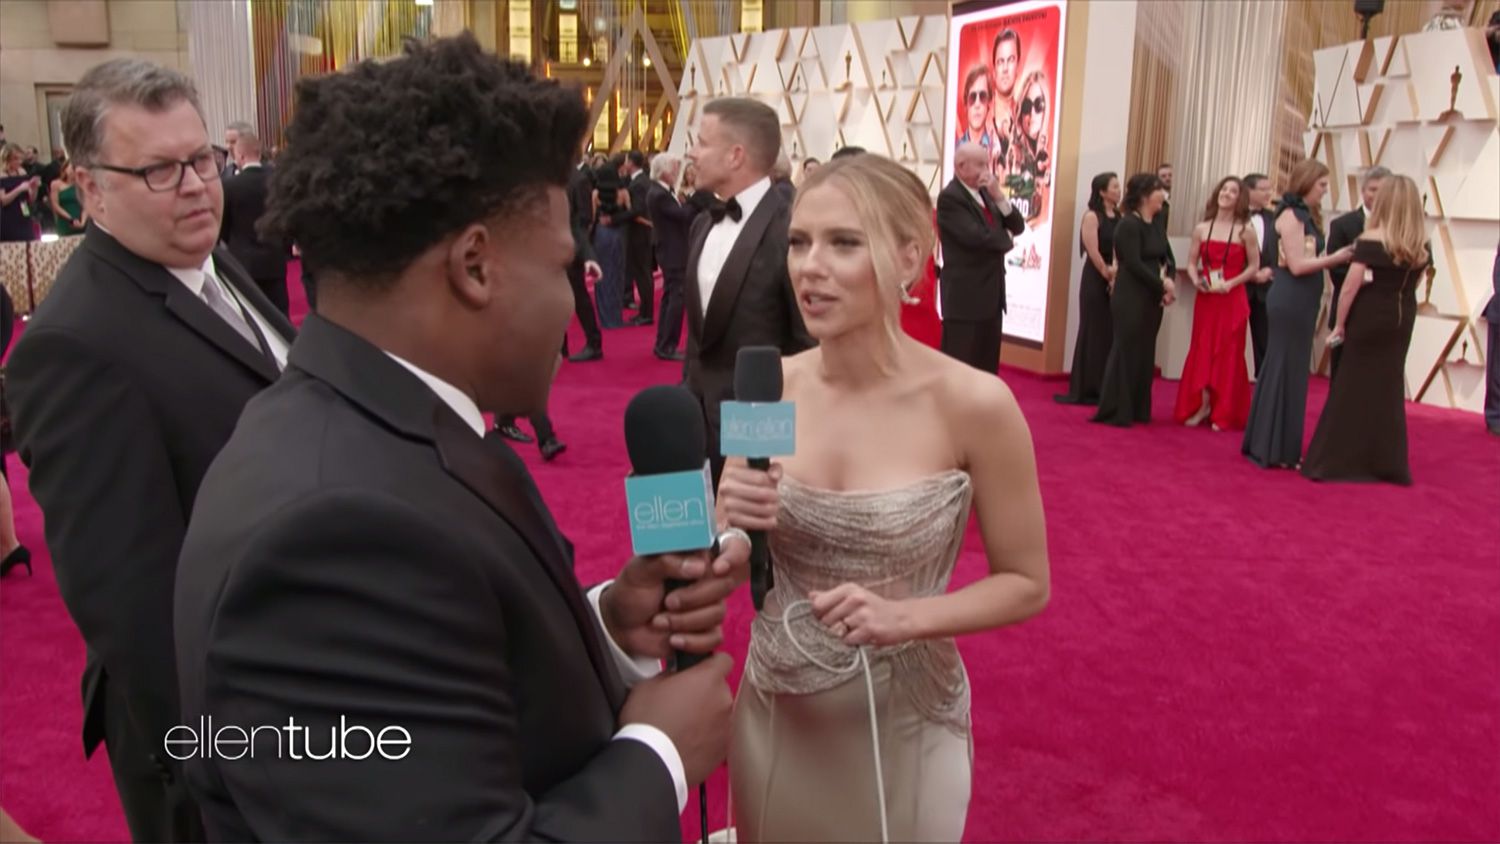 'Cheer' Breakout Star Jerry Harris at the Oscars